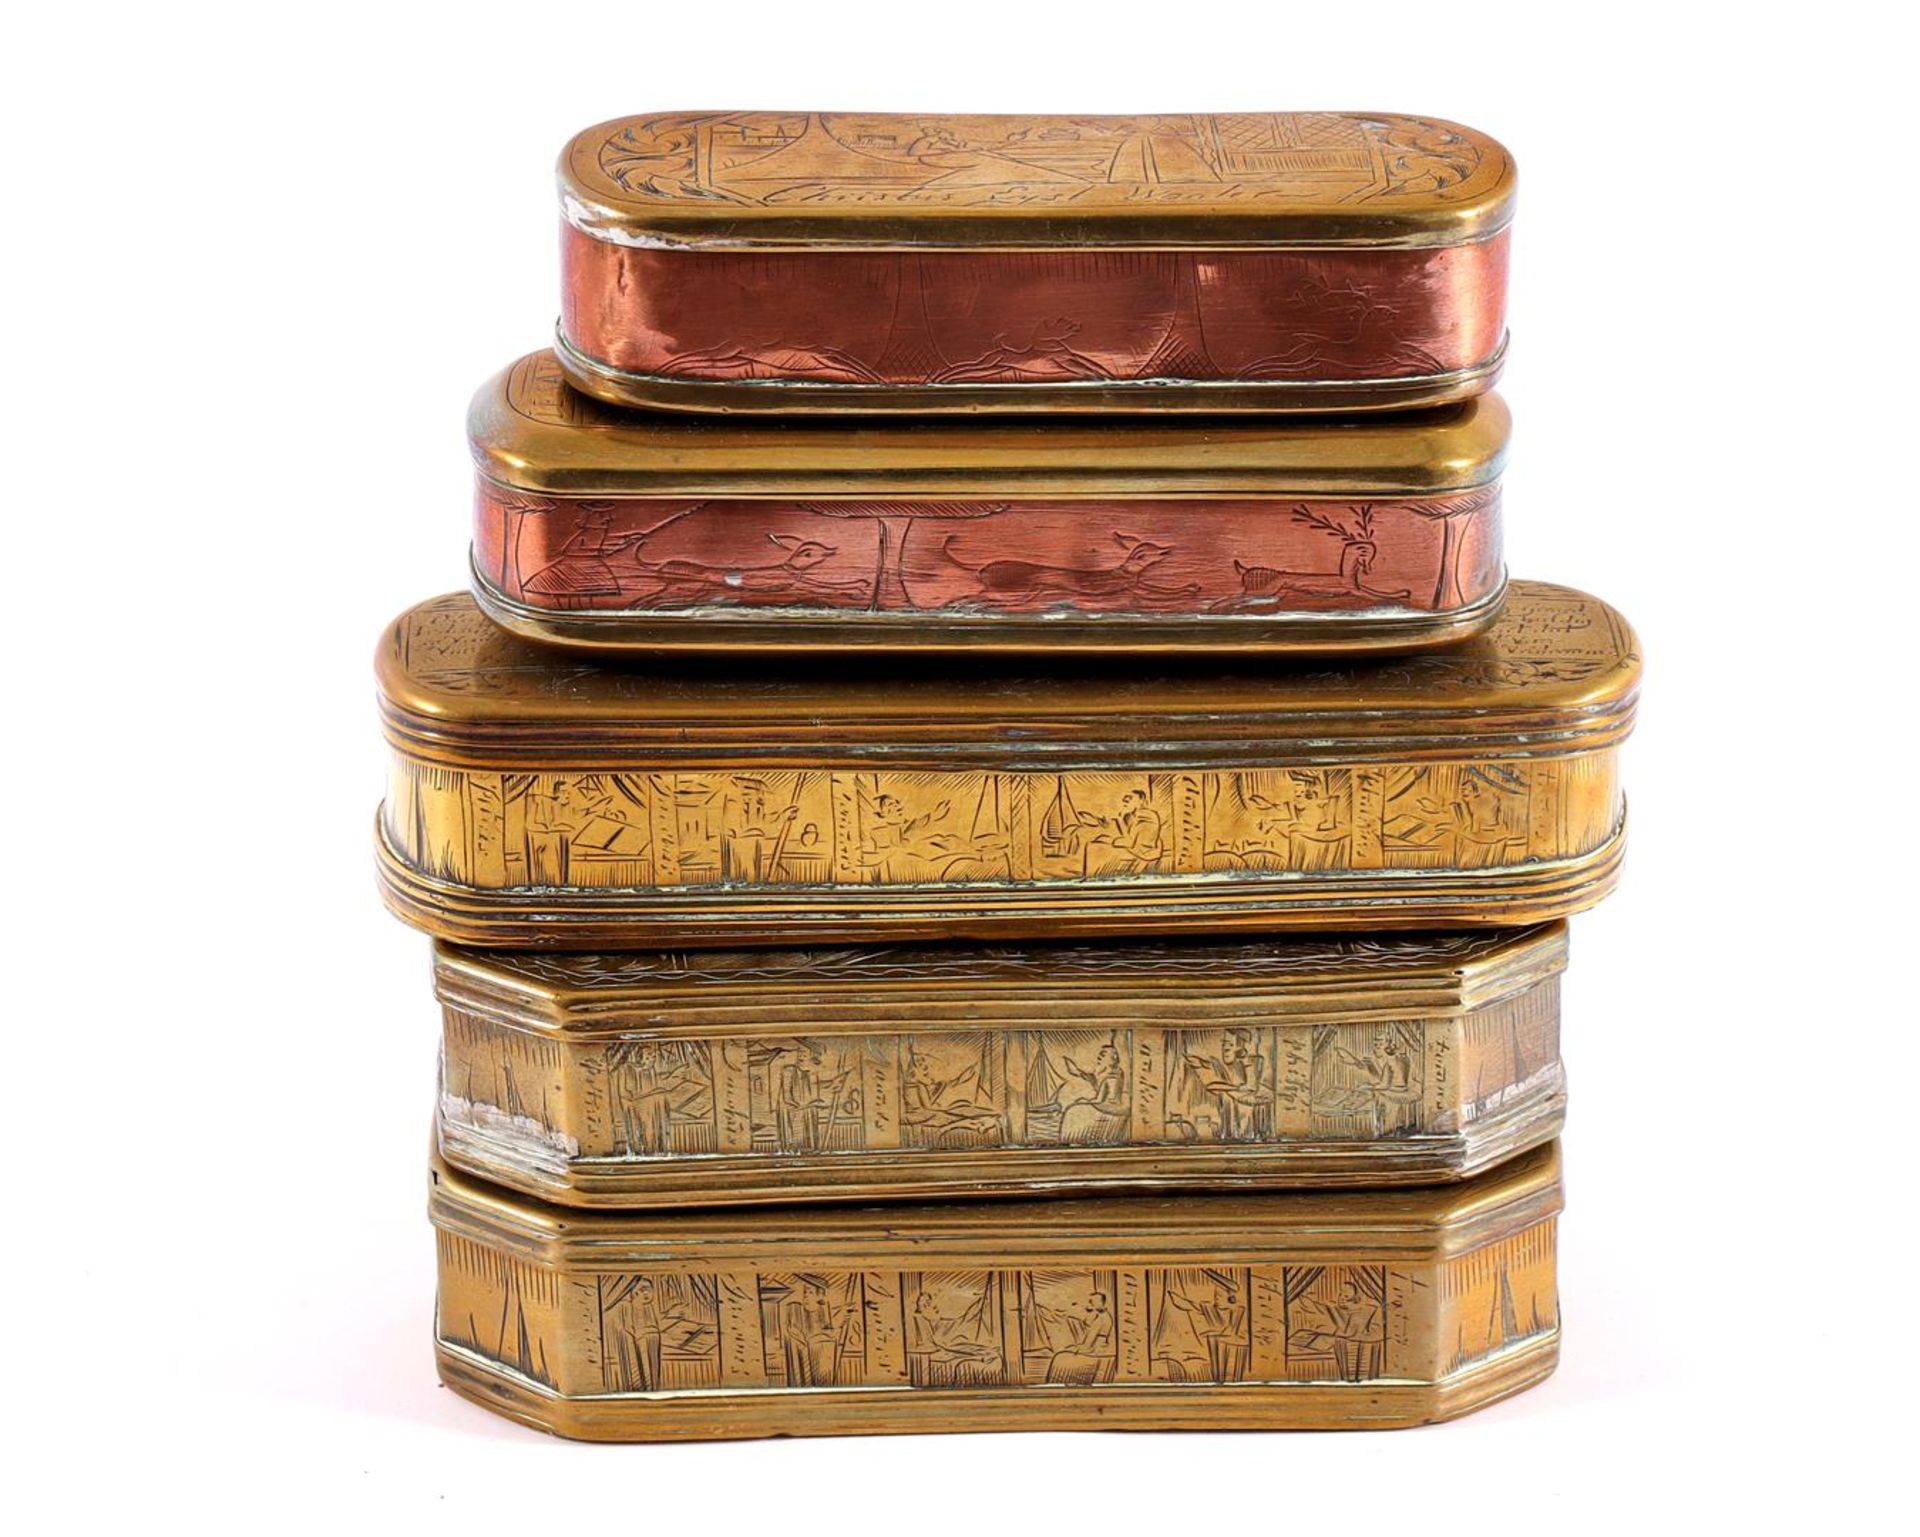 5 copper tobacco boxes with engraved decoration - Image 2 of 2